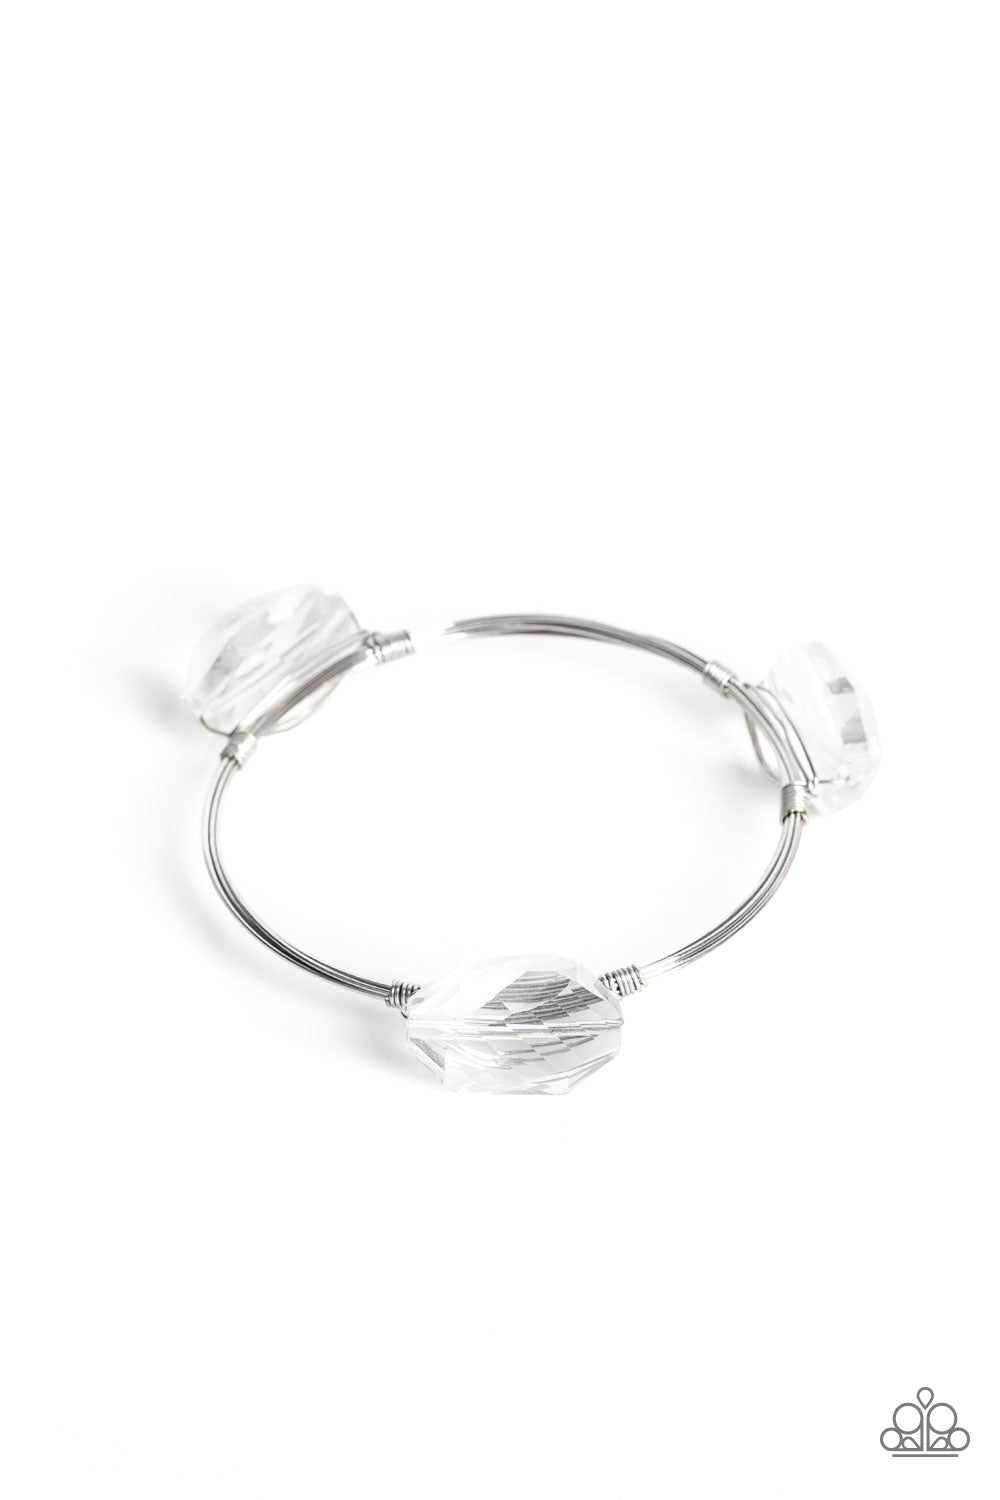 Paparazzi Accessories - Galactic Getaway - White Bangle Bracelets featuring a glassy shimmer, oversized faceted gems are wrapped in place along the front of coiled silver wires that join into a solitaire bangle around the wrist for an out-of-this-world finish. Due to its prismatic palette, color may vary.  Sold as one individual bracelet.